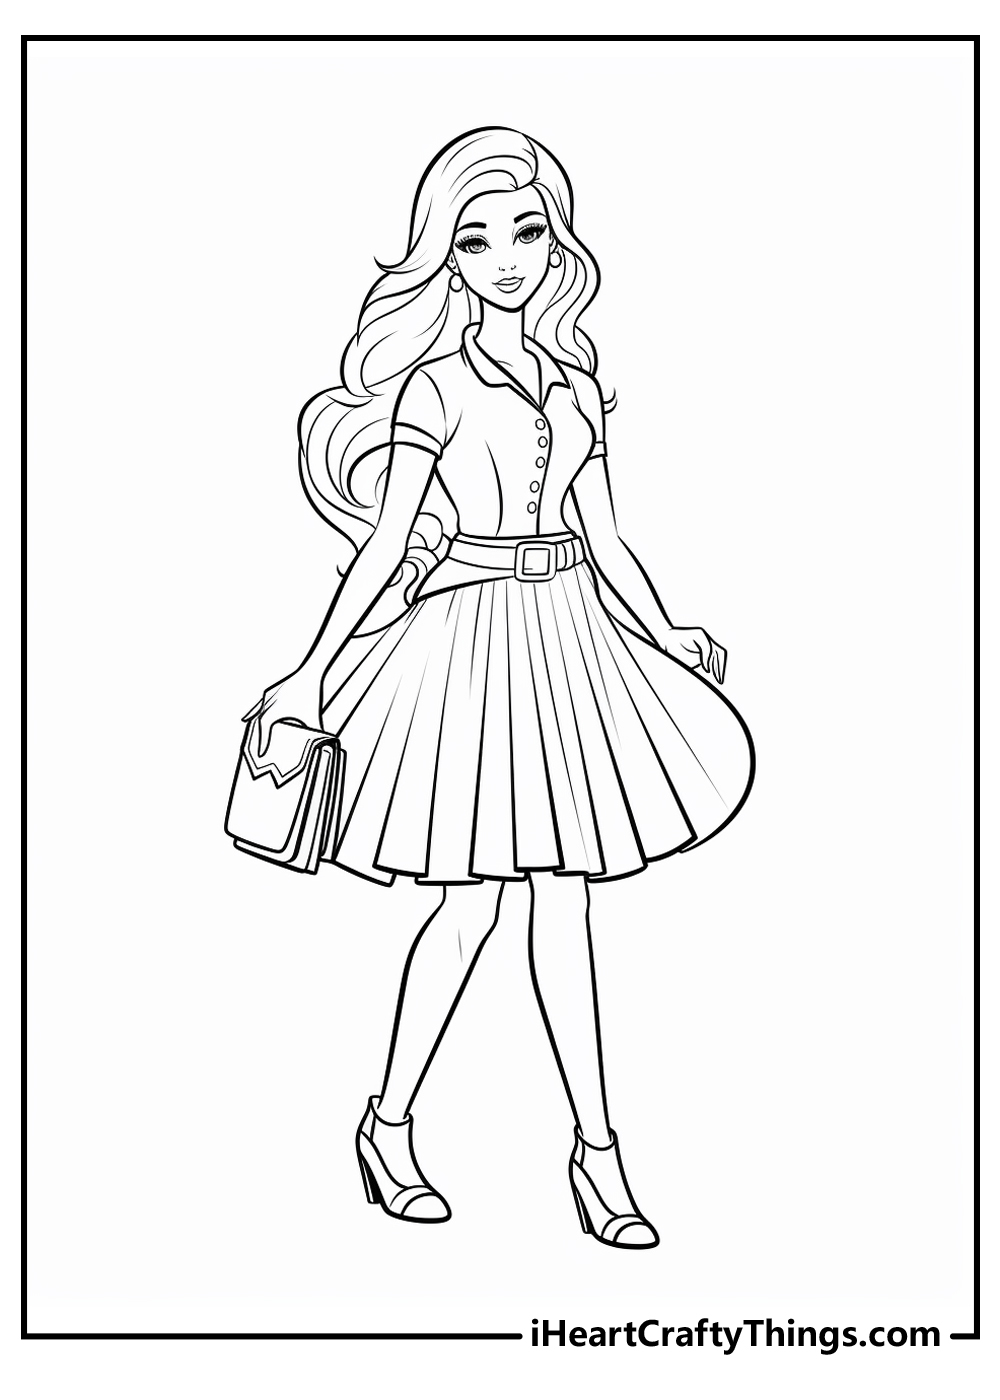 Barbie coloring pages free printables